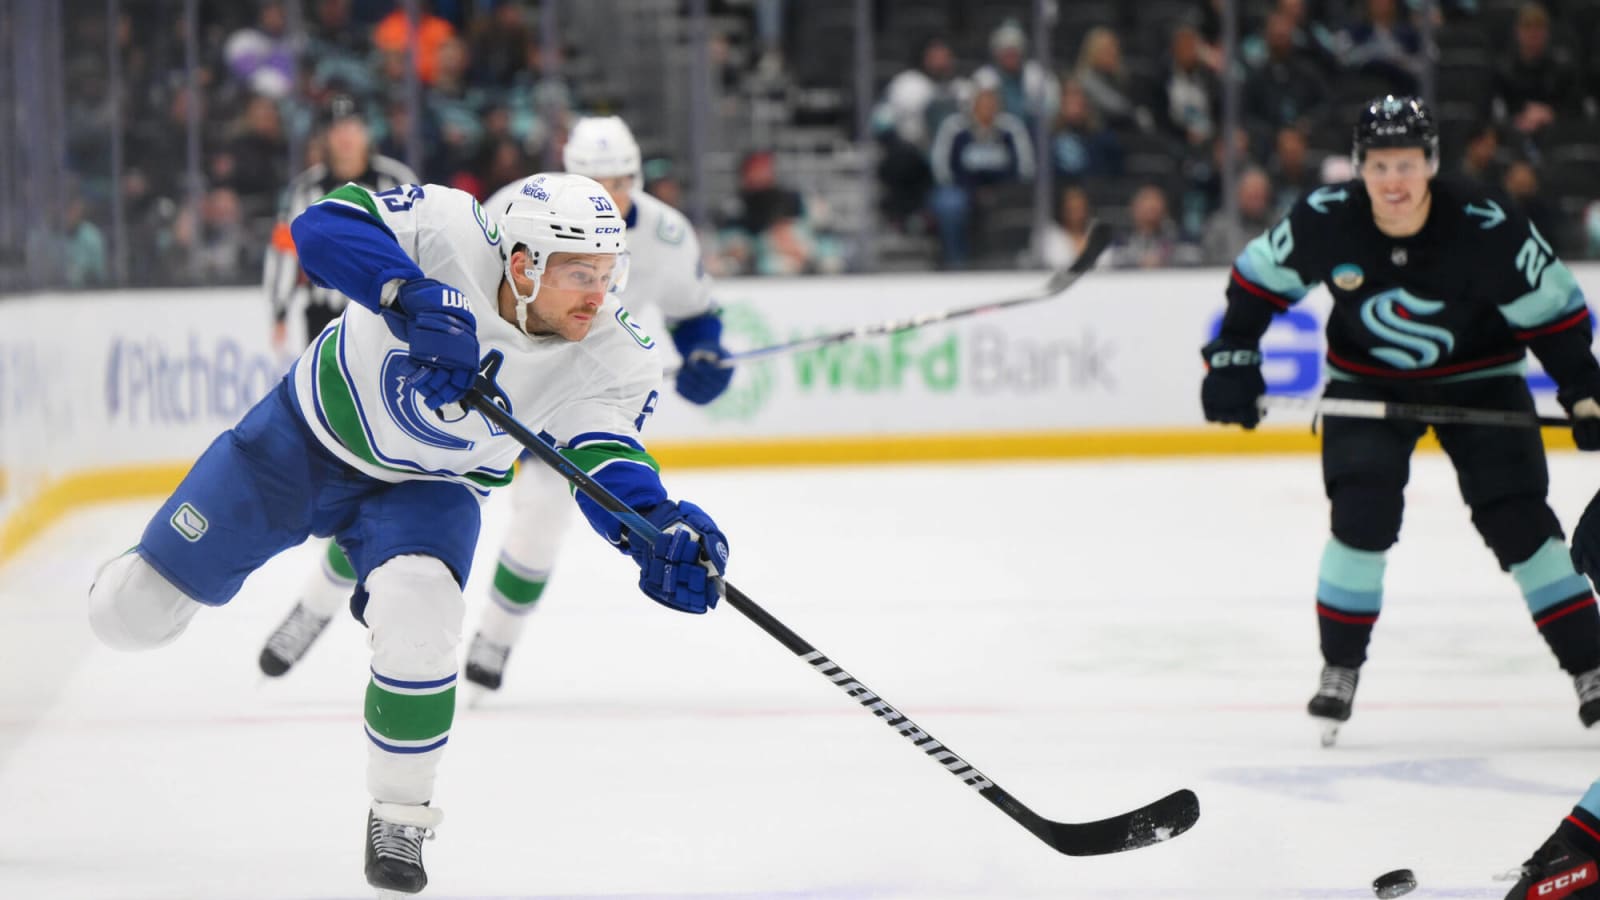 Scenes from morning skate: Bains with Miller and Boeser and a new look power play as Canucks face Kraken